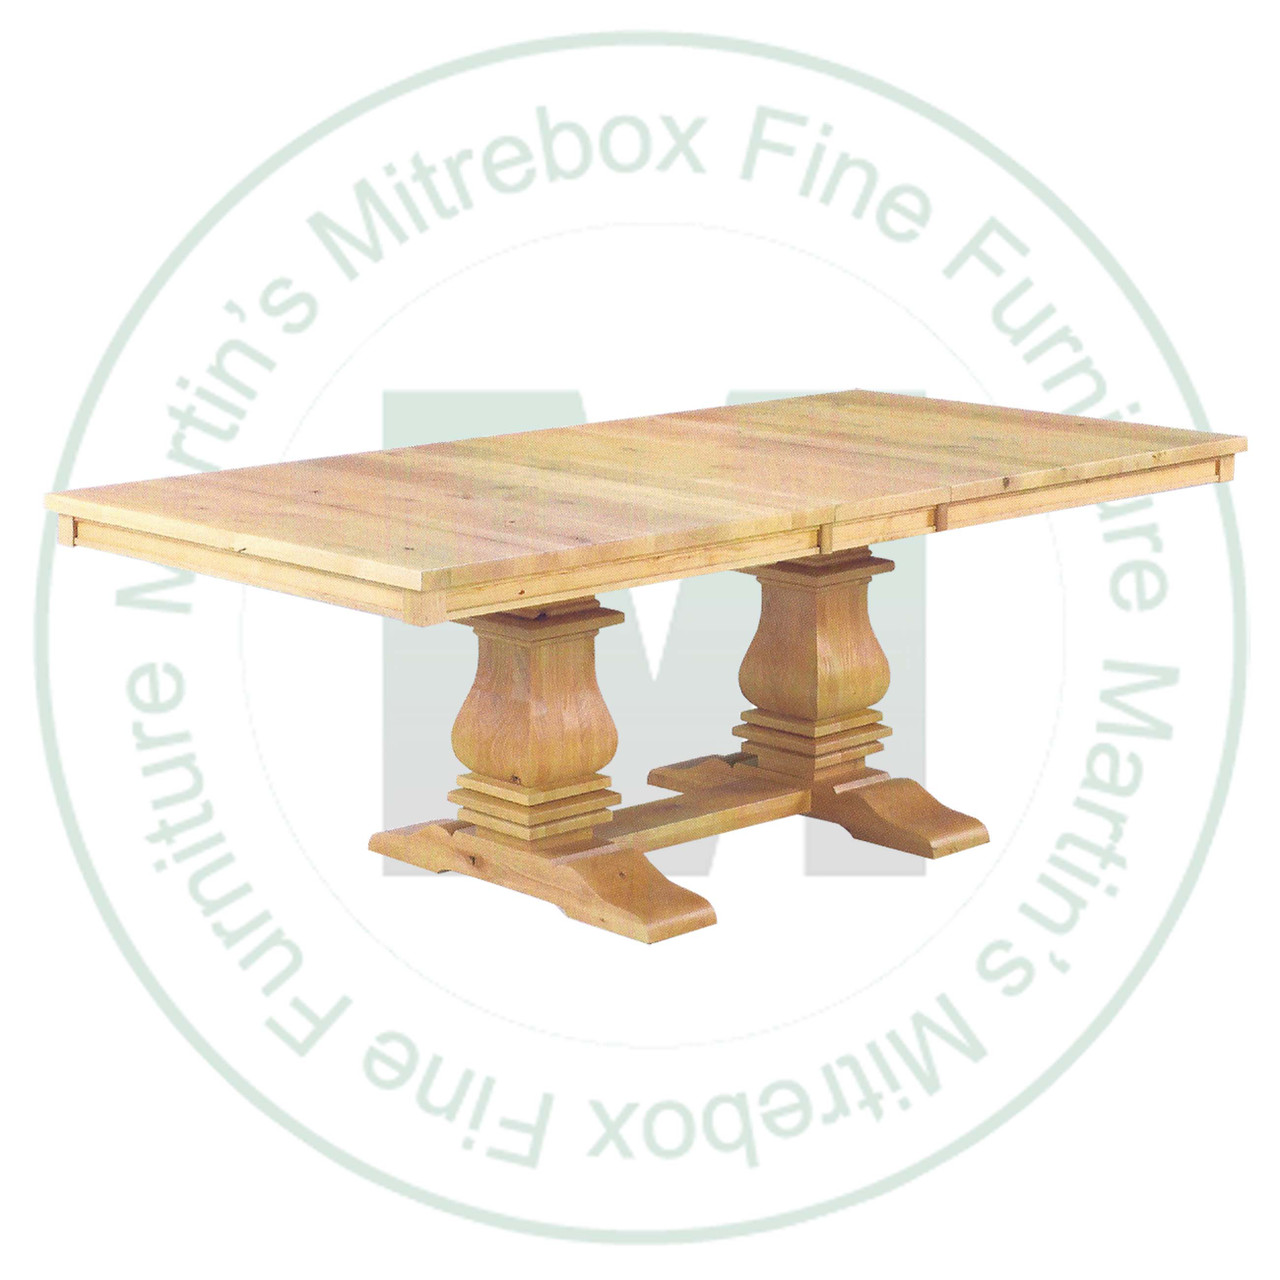 Wormy Maple Mediterranean Solid Top Pedestal Table 48''D x 108''W x 30''H. Table Has 1.25'' Thick Top